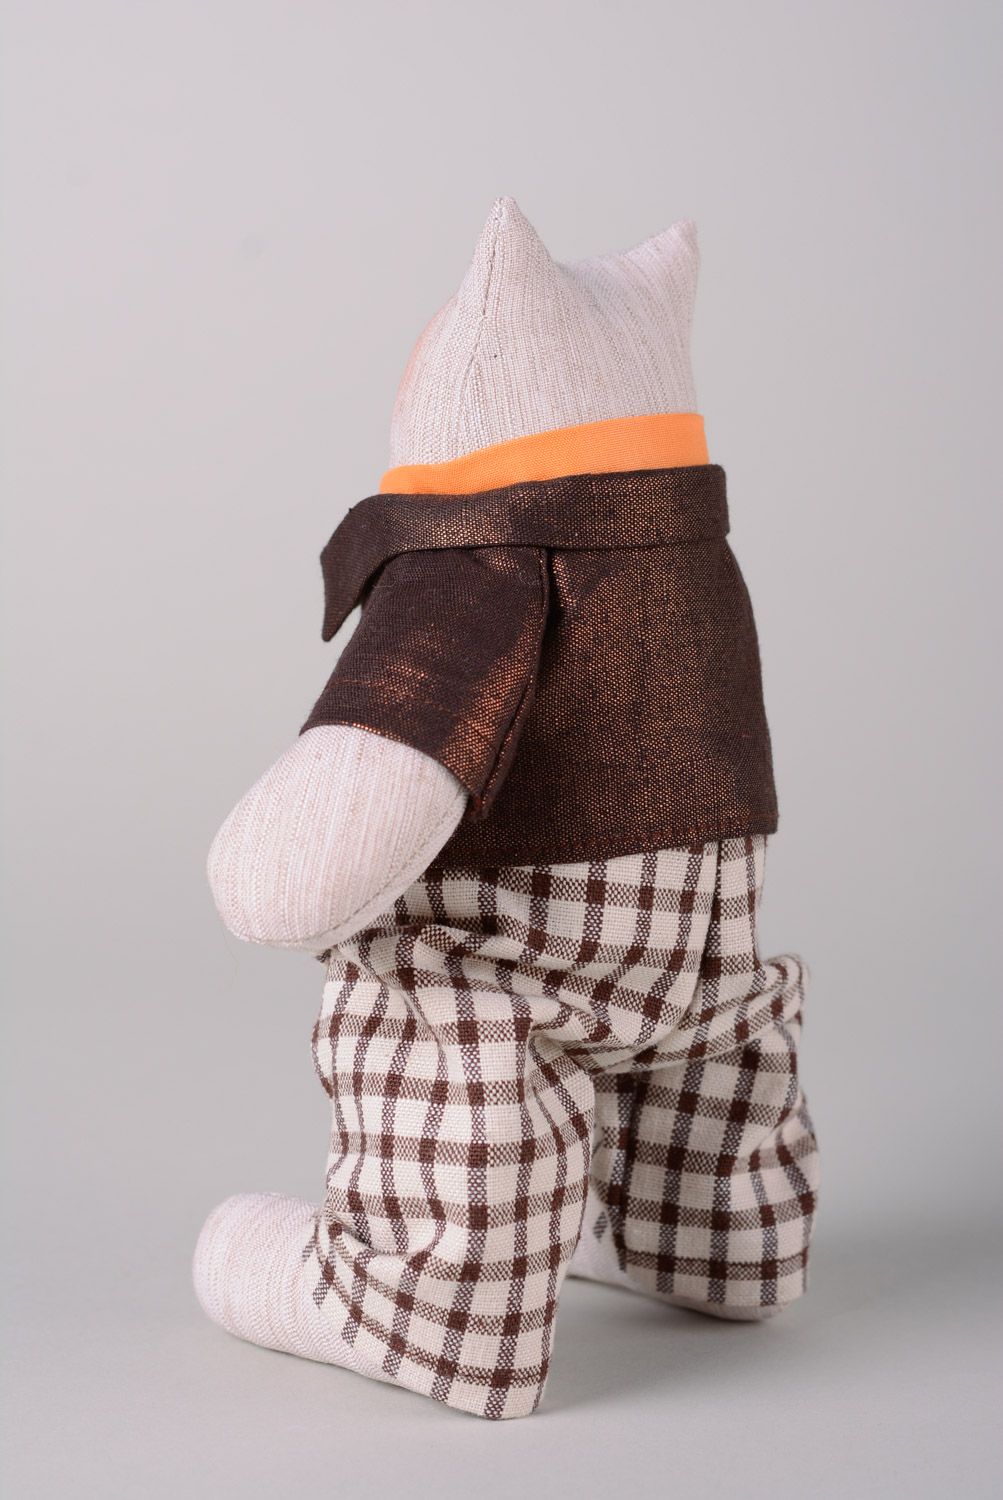 Handmade soft toy sewn of cotton and linen Cat in jacket and checkered trousers photo 5